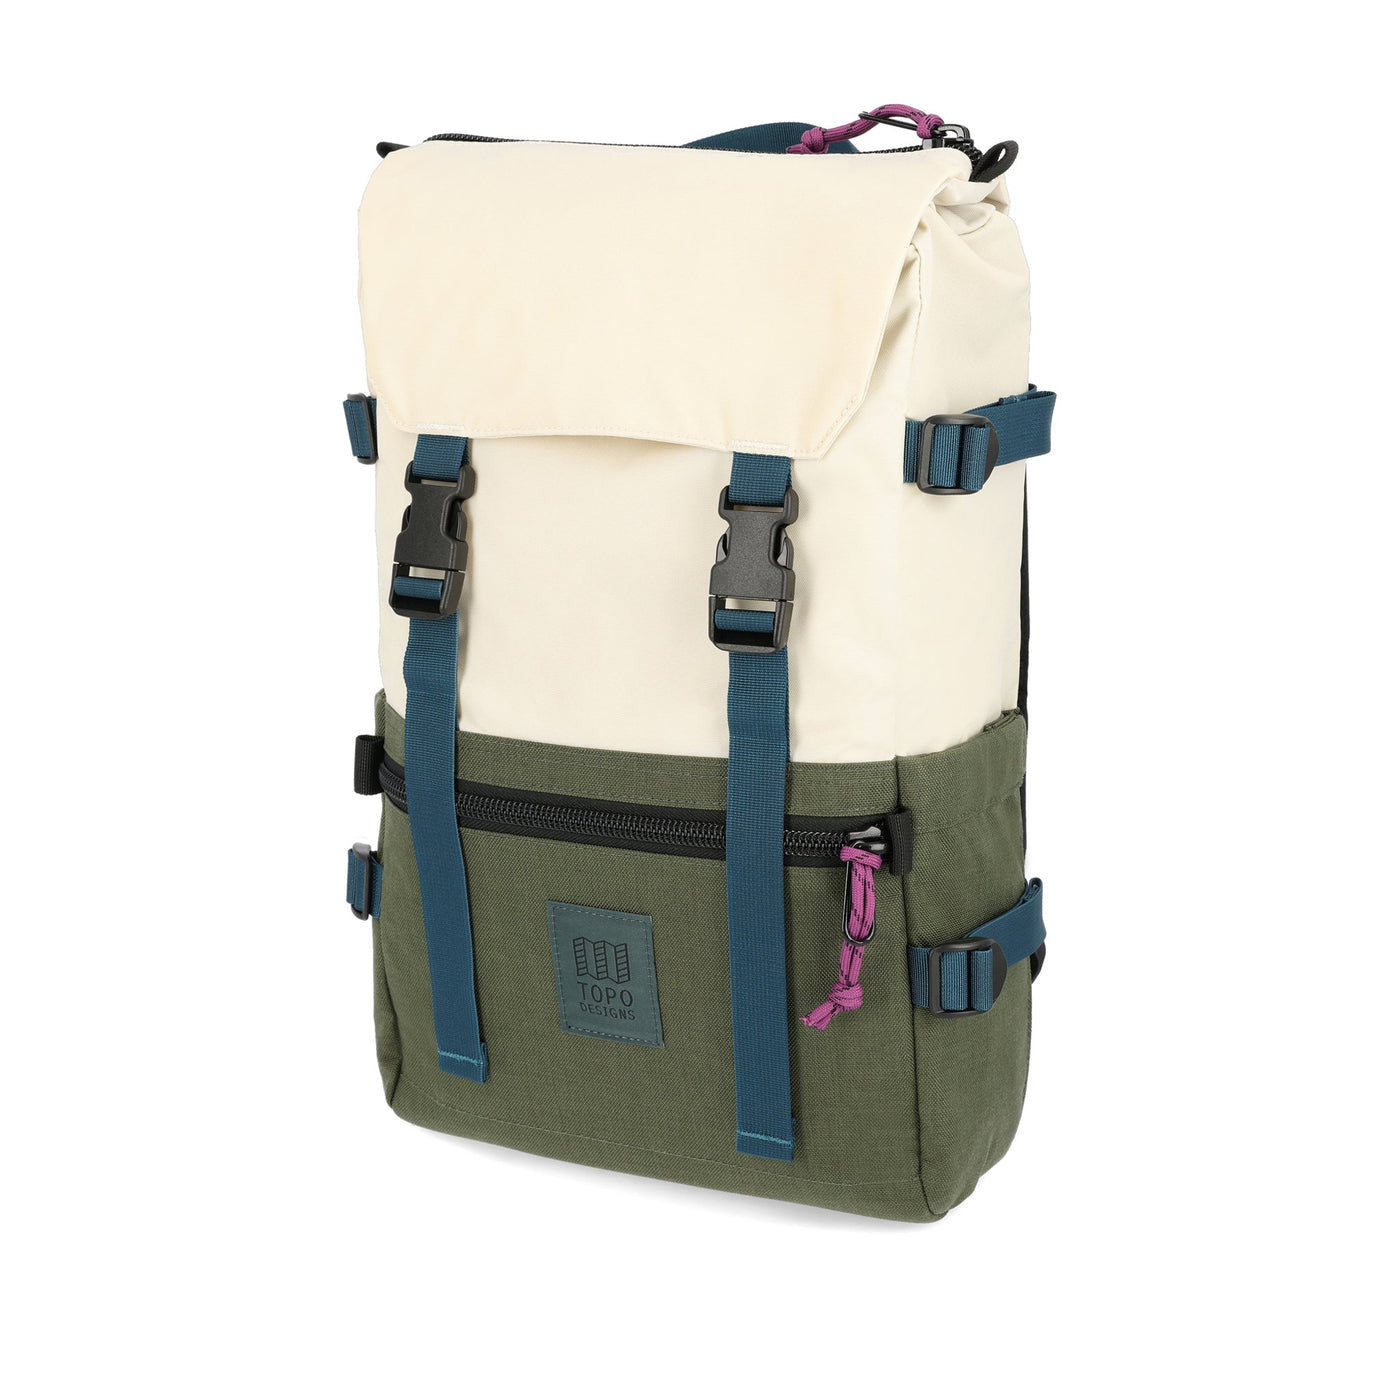 Topo Designs Rover Pack Classic laptop backpack in recycled "Bone White / Olive" green.